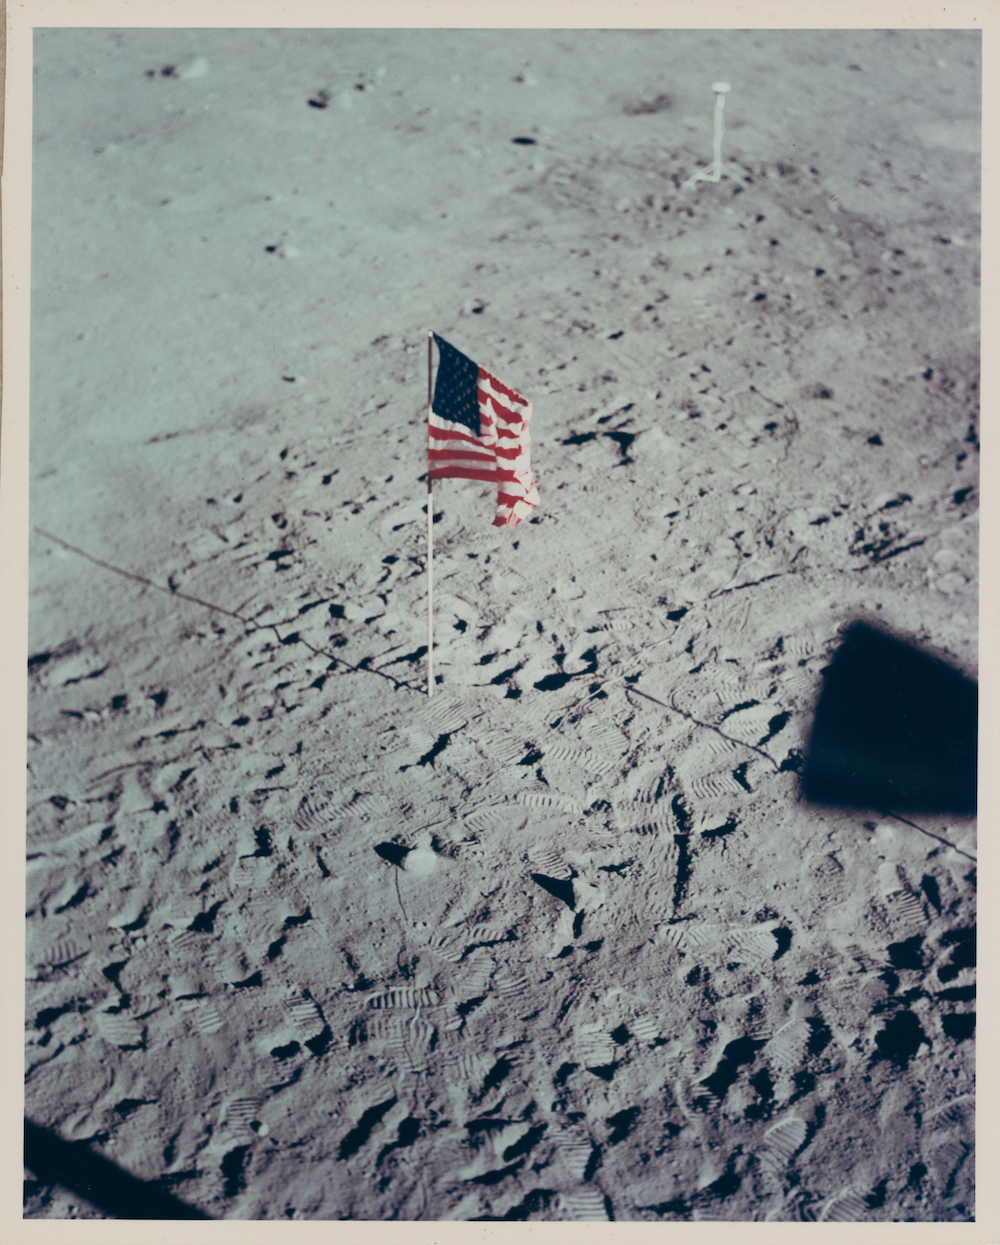 This photograph of the American flag on the Moon was on the cover of LIFE magazine in August 1969